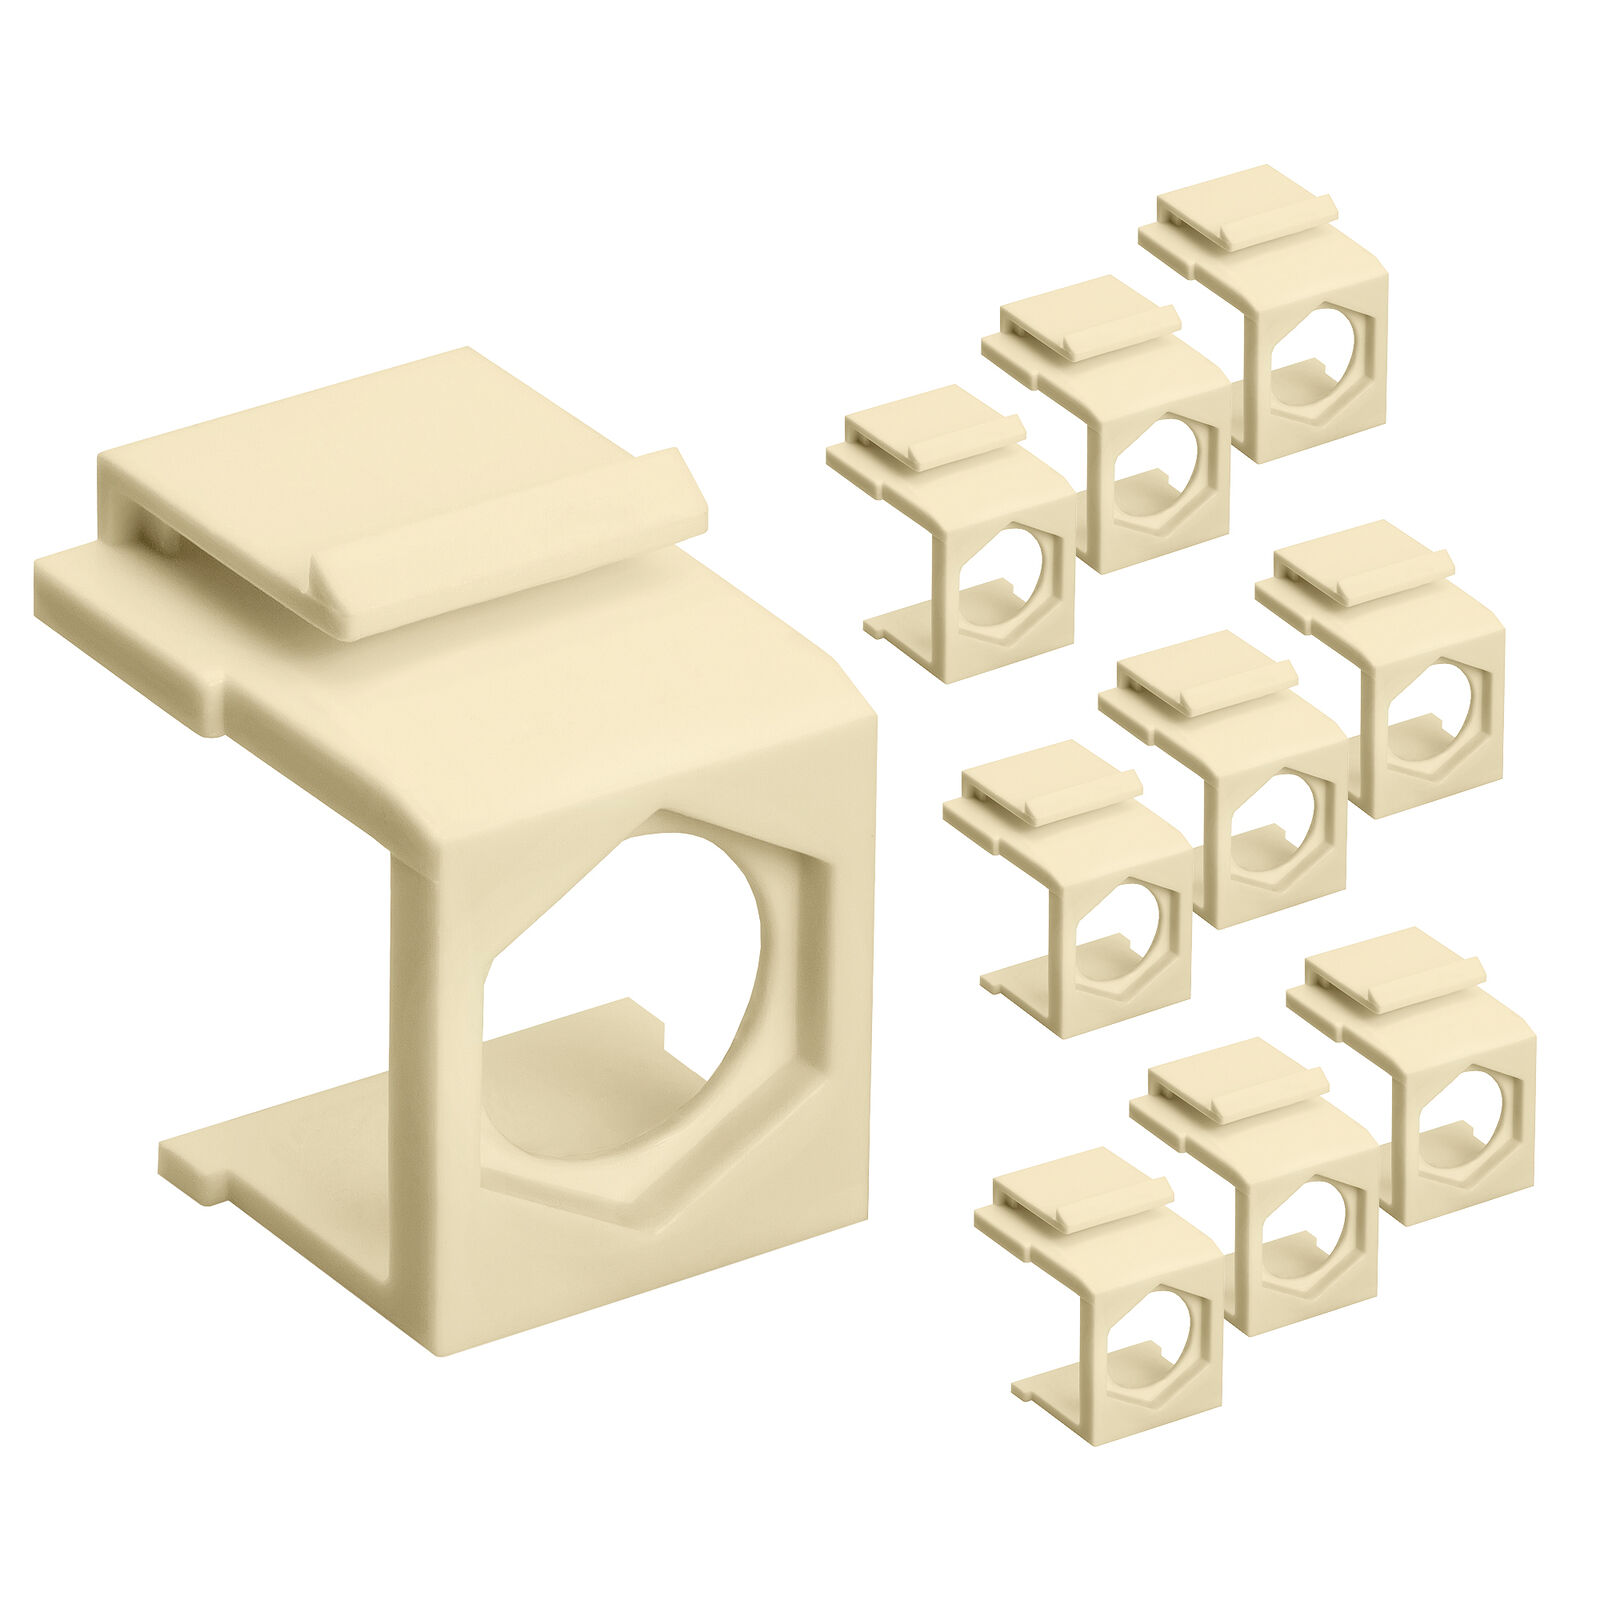 10 Pcs Blank Keystone Jack Insert Filler for RCA F-Type Connector Snap-In Ivory